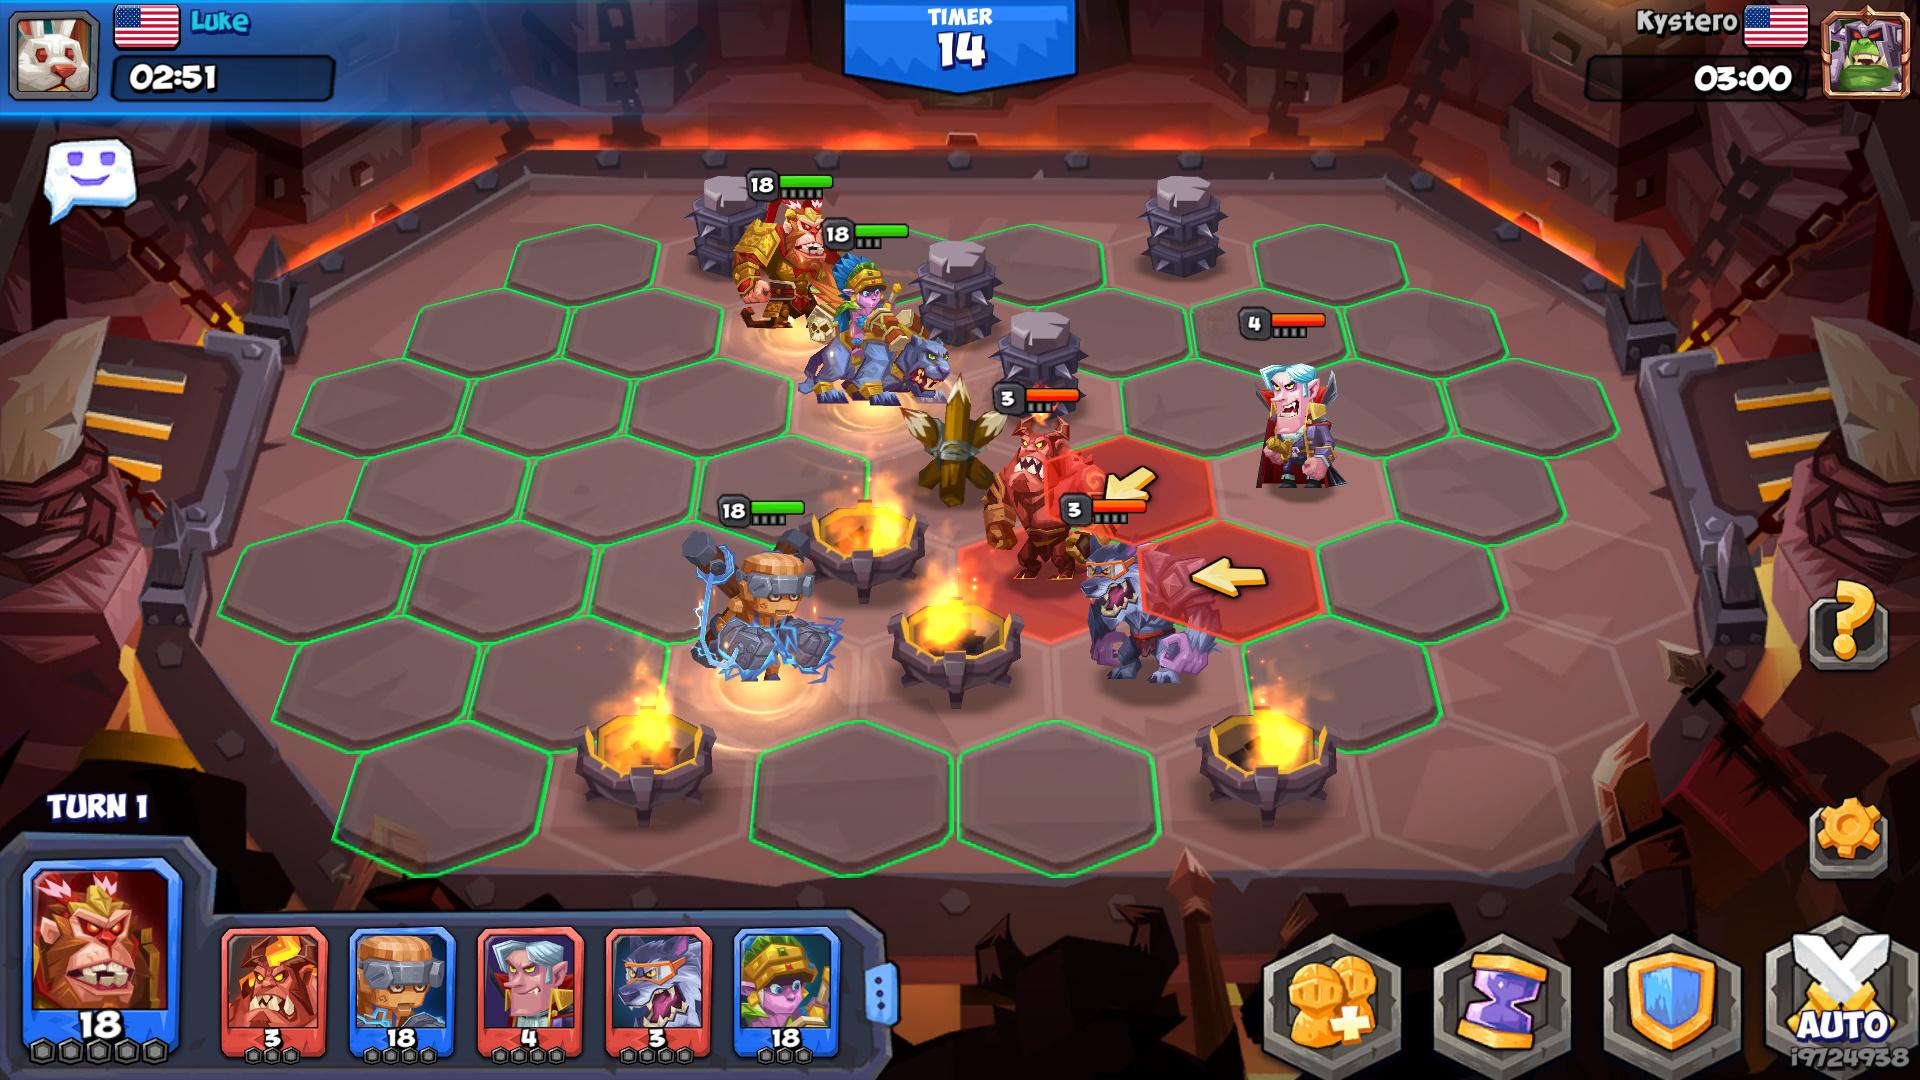 Screenshot №23 from game Tactical Monsters Rumble Arena